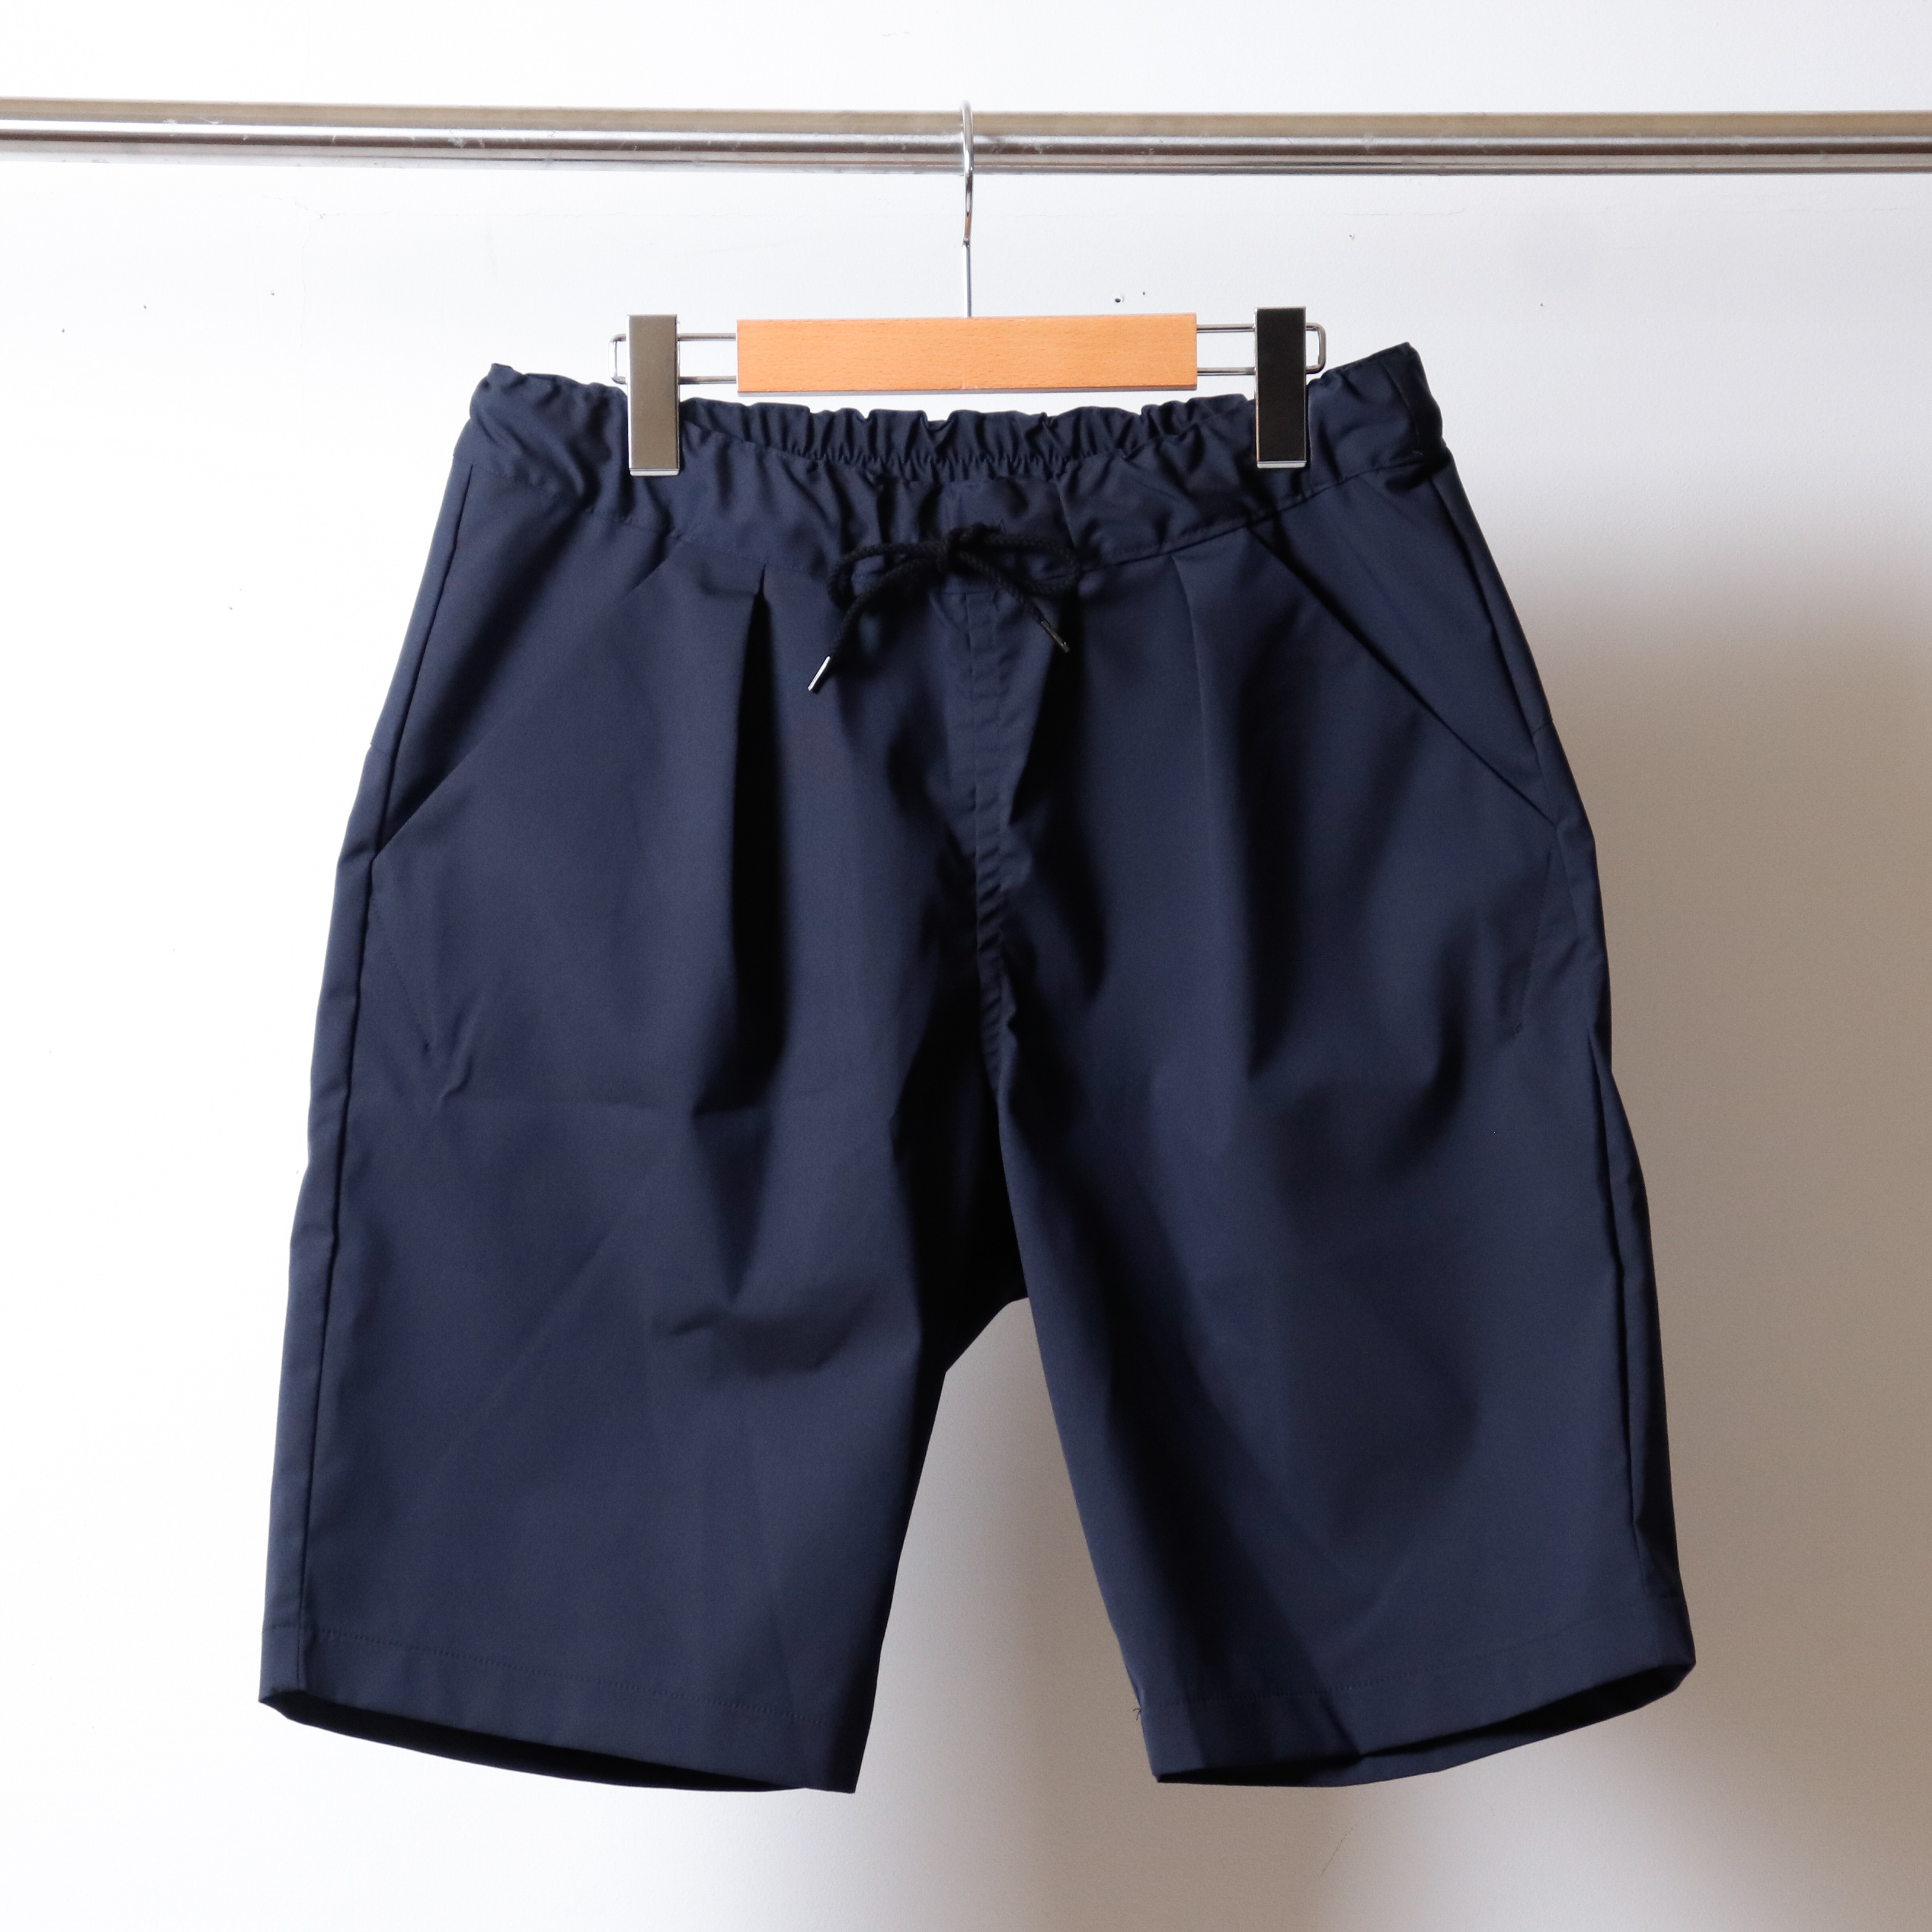 【MEN'S】 Re made in tokyo japan[アールイー] トロクールタックハーフパンツ入荷♪ | BLUEBEAT ONLINE